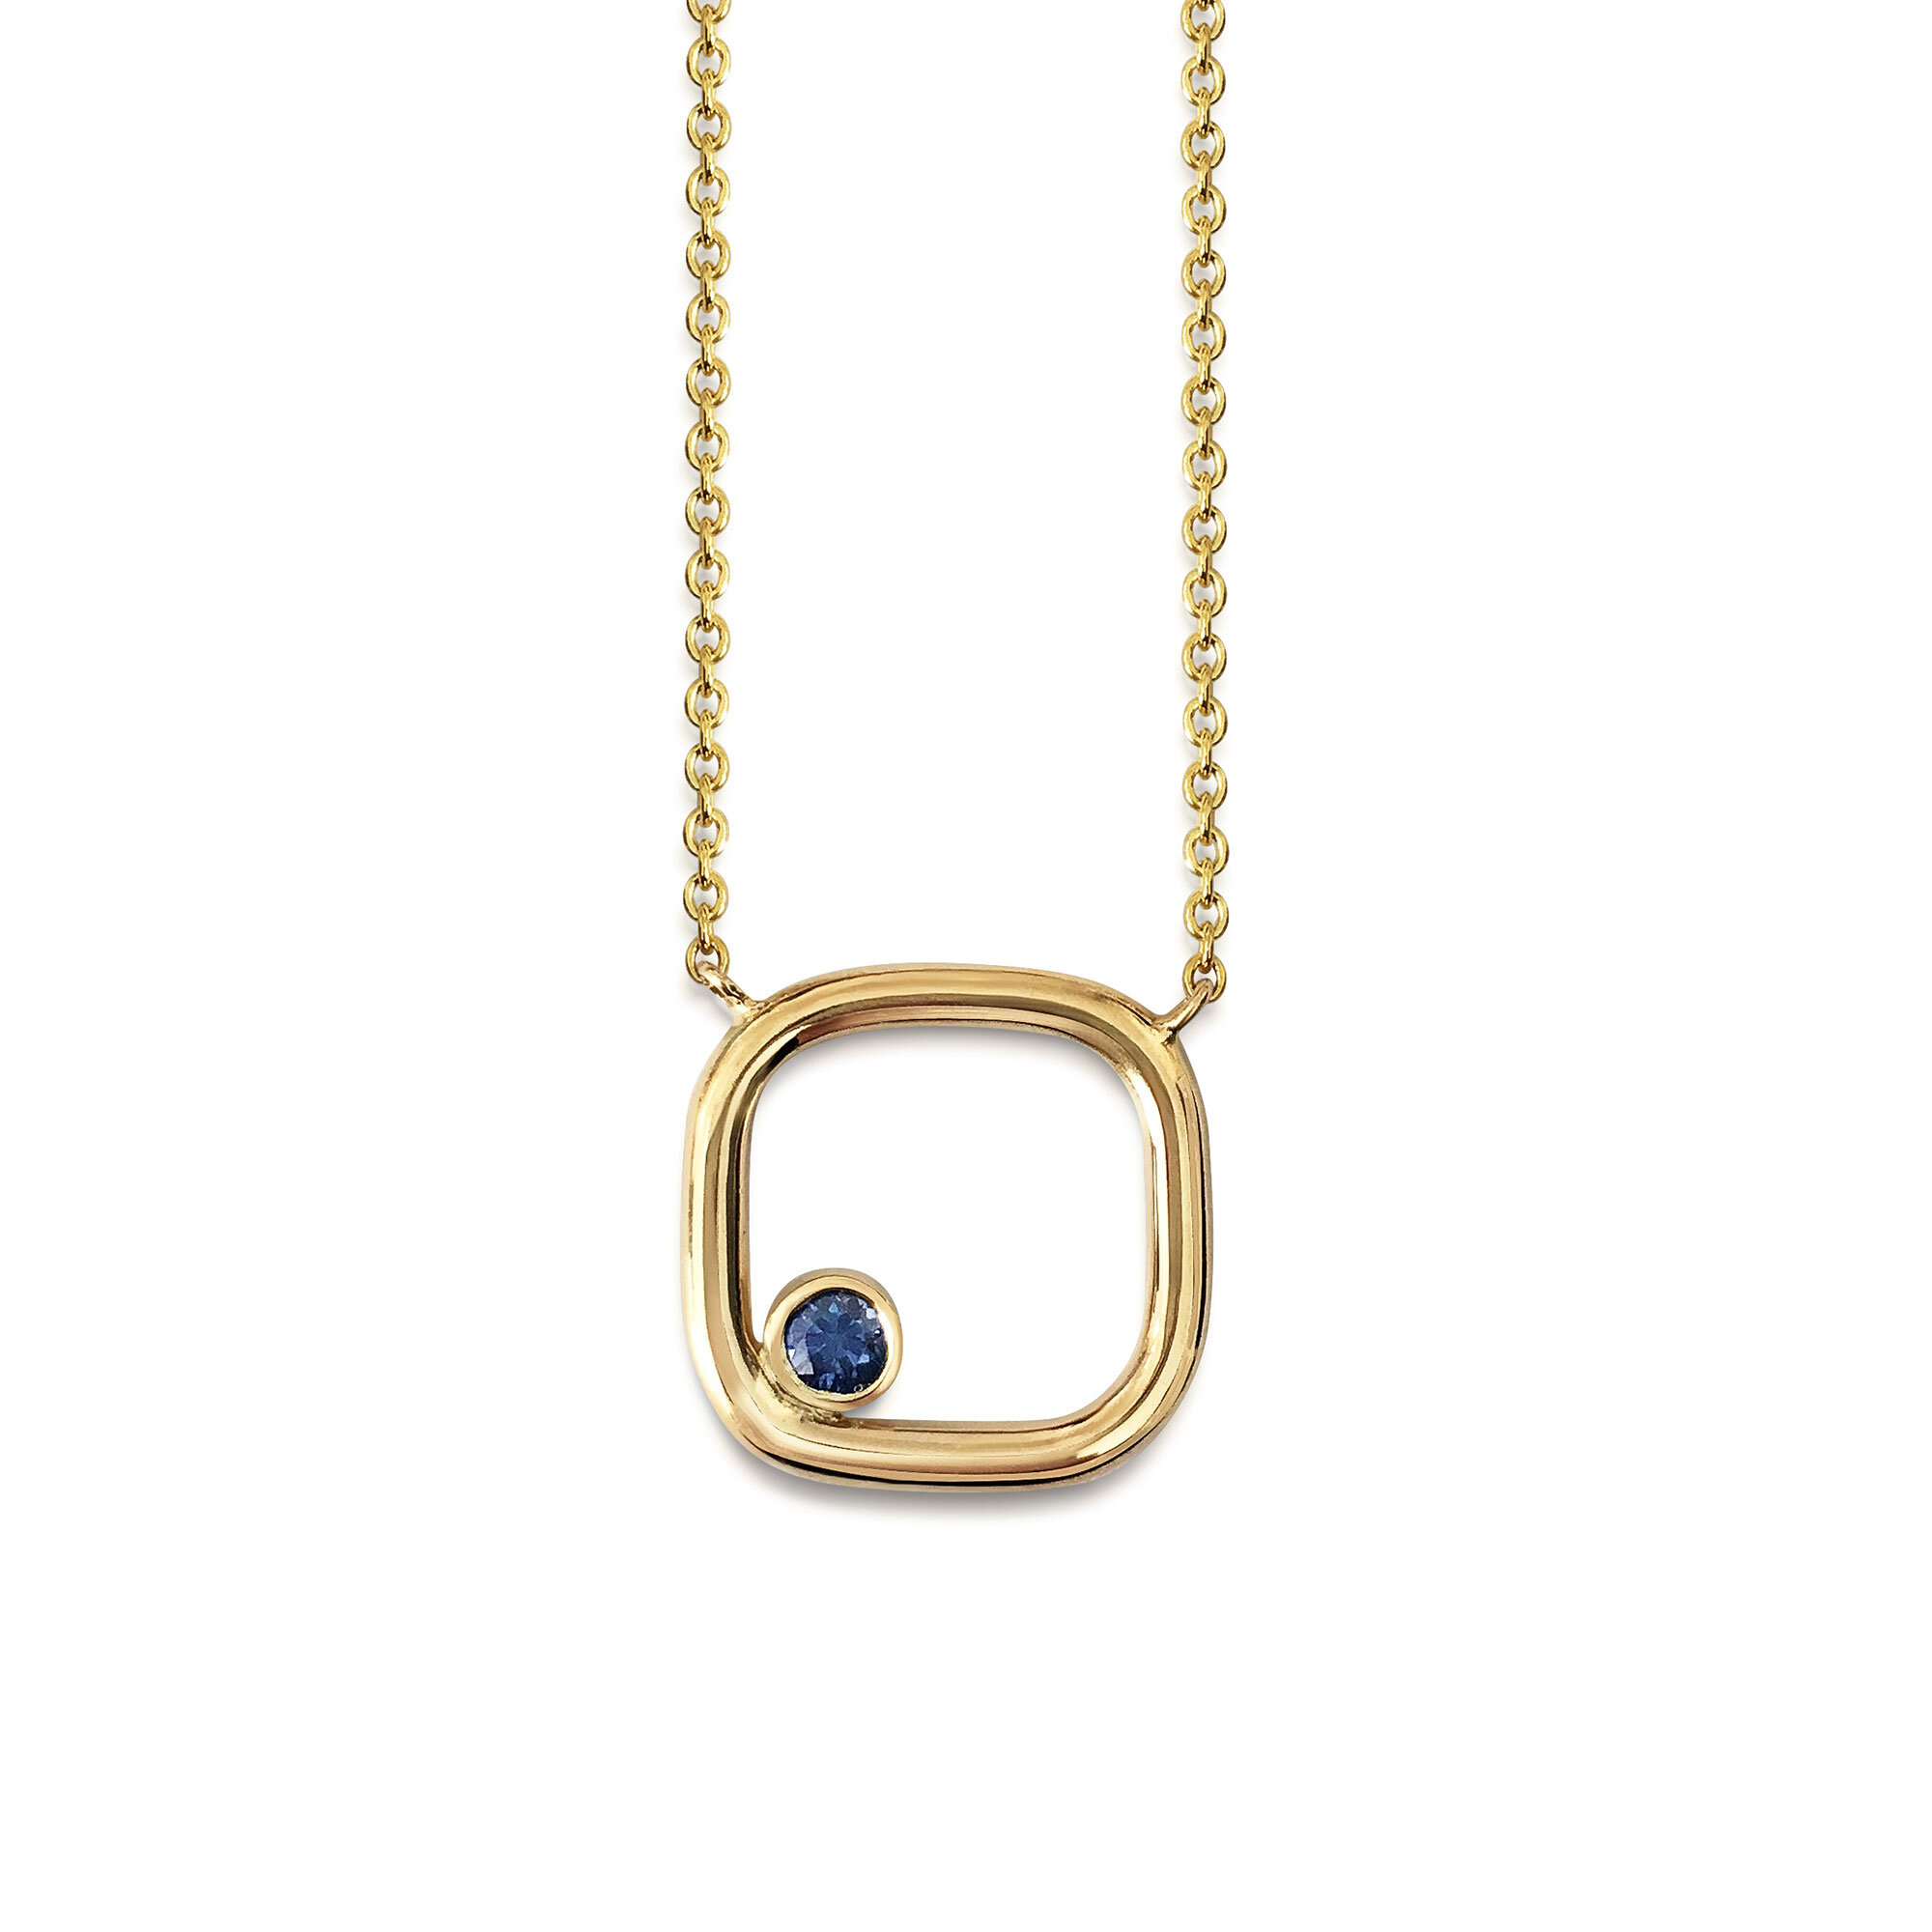 Sapphire pendant mounted in 18ct yellow gold. 